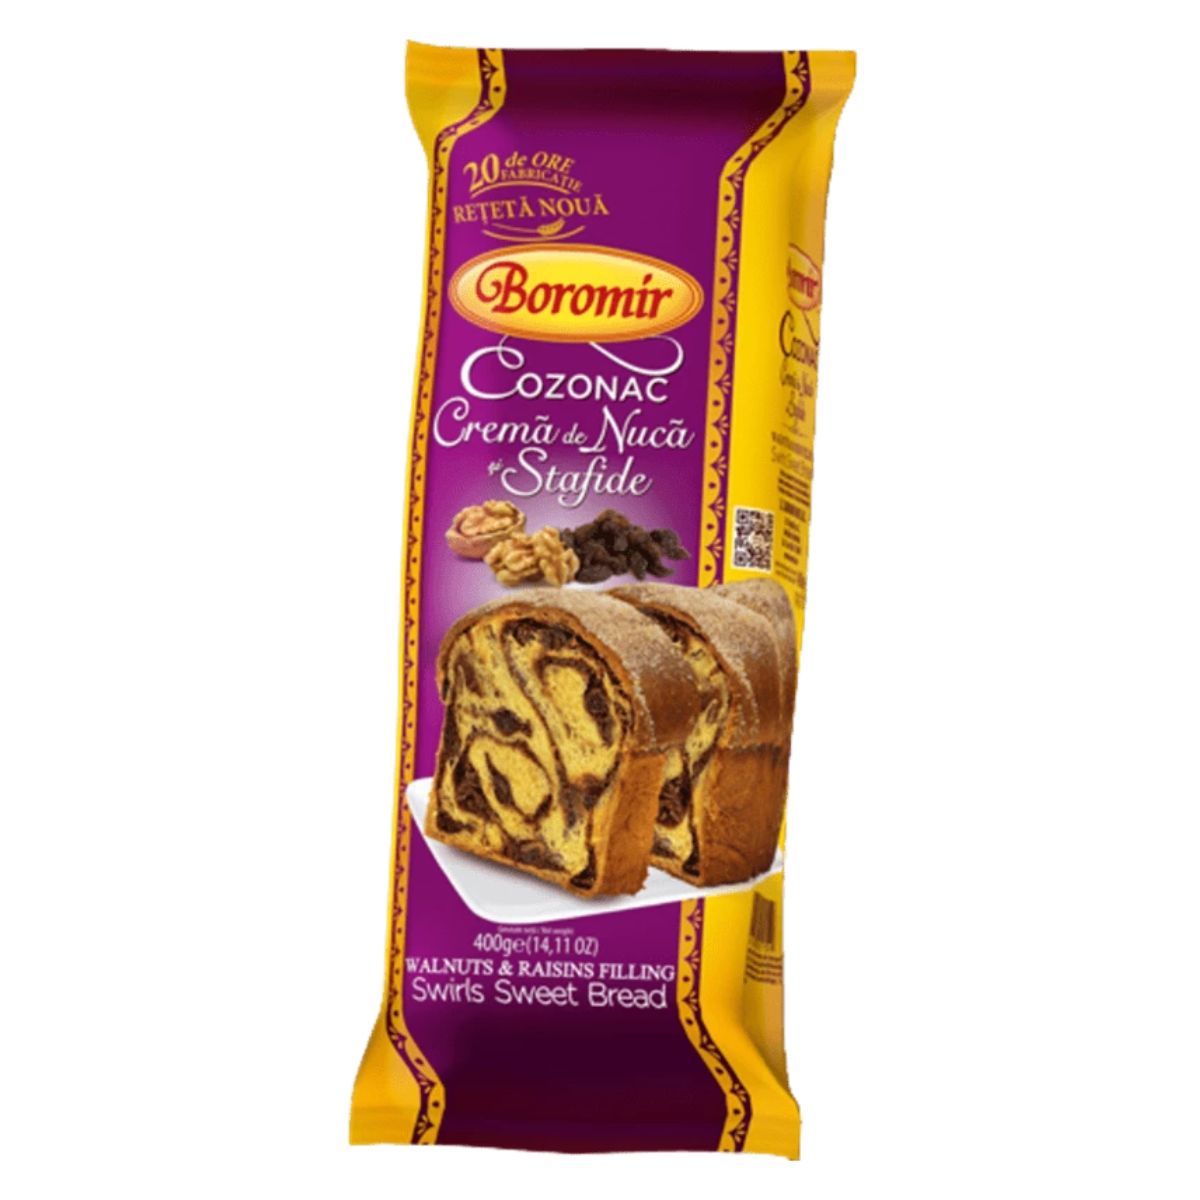 Package of Boromir - Cozonac with Walnuts and Raisins - 450g, a 450g loaf with walnuts and raisins filling. The packaging is predominantly purple and showcases an enticing image of the sliced bread on the front.